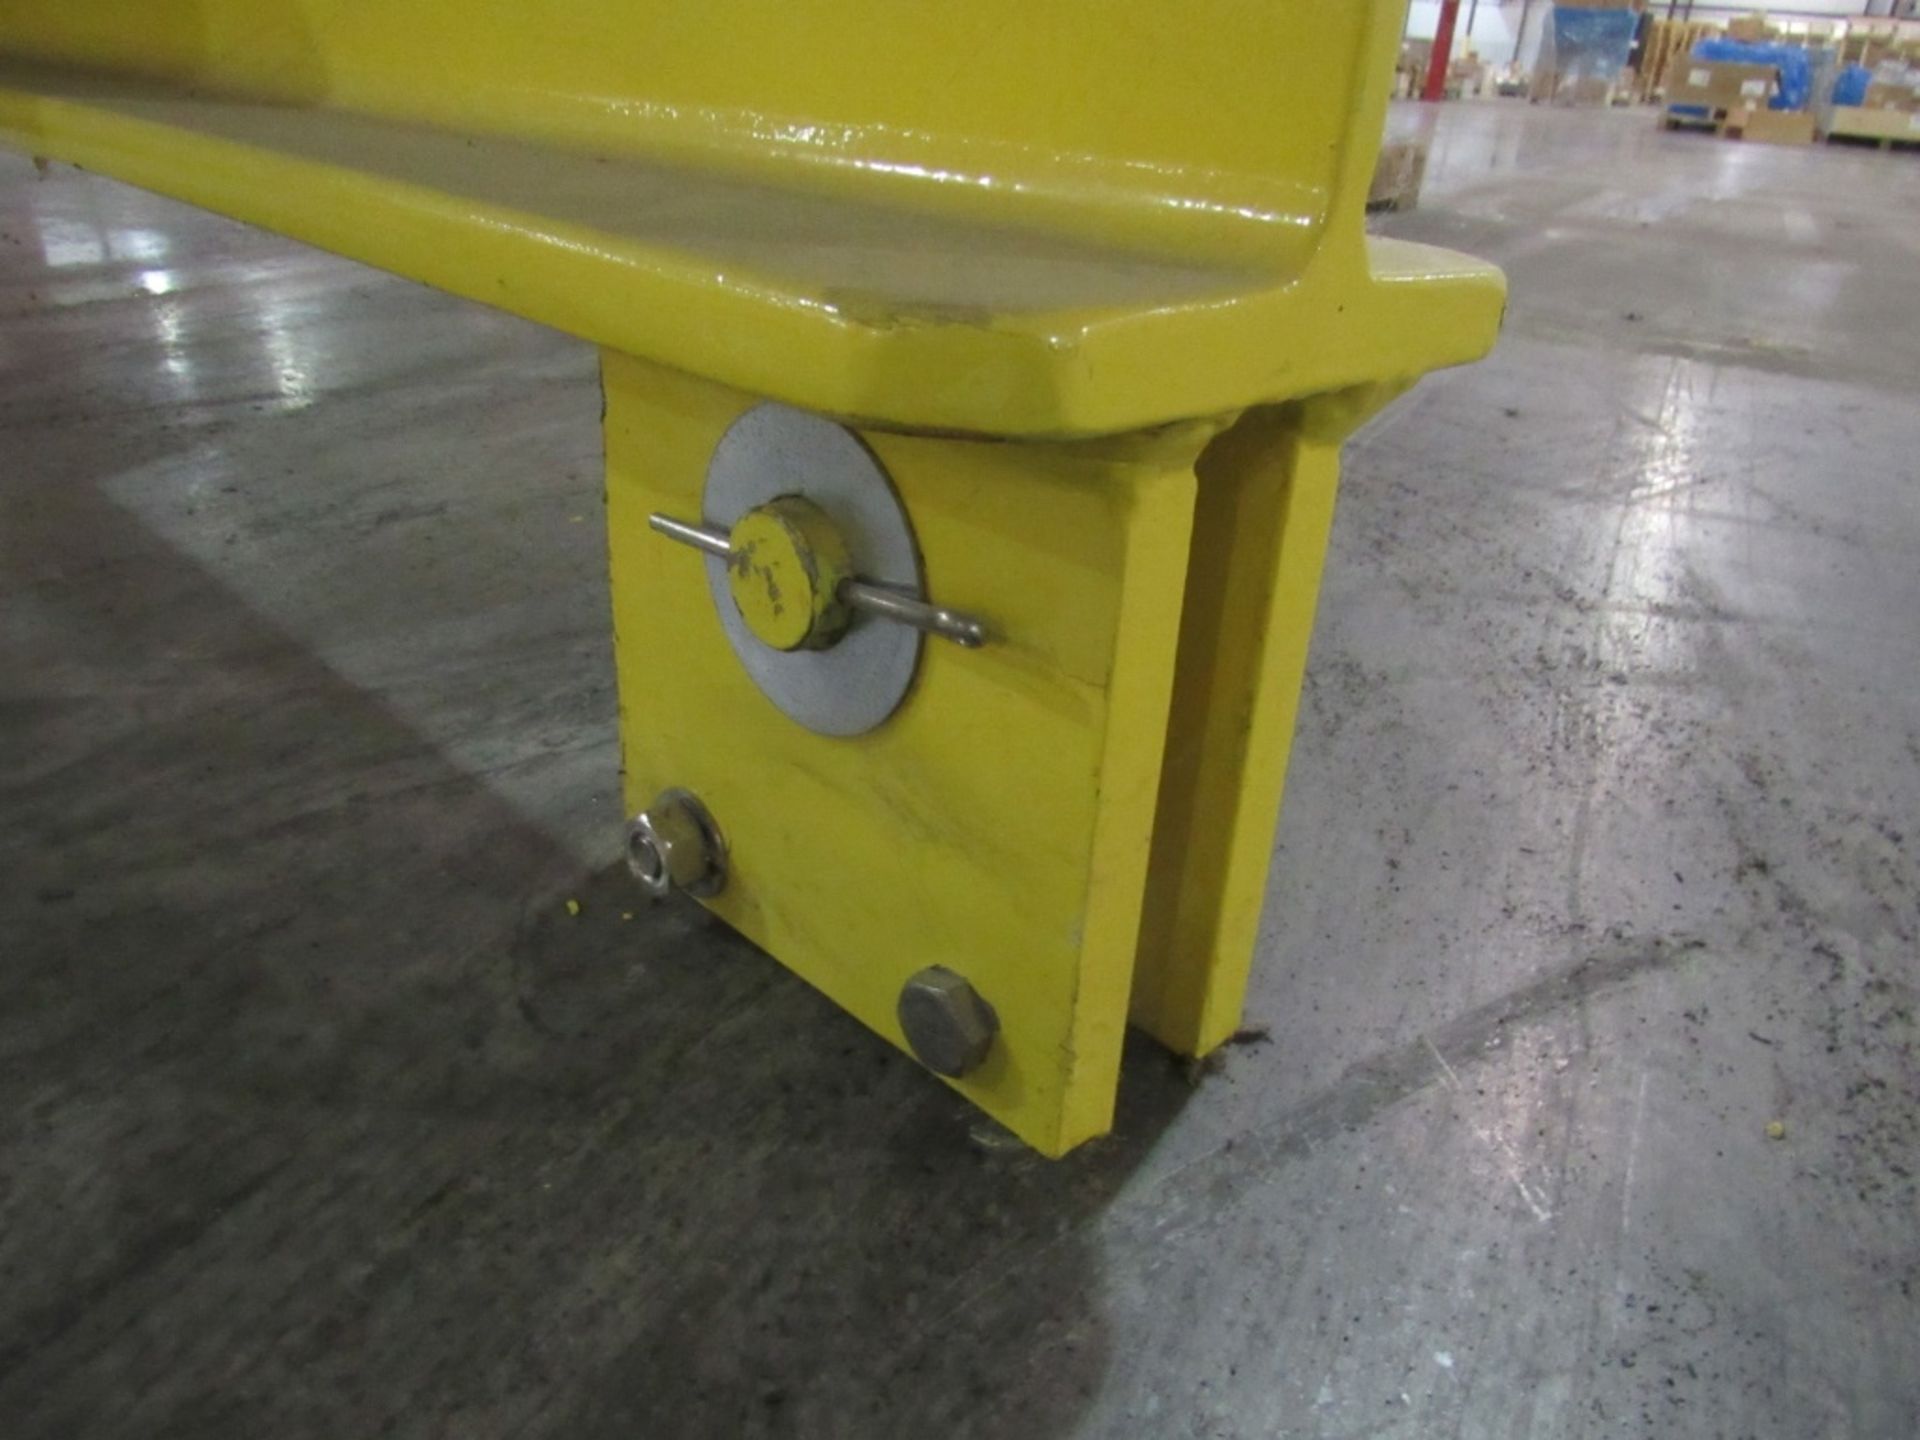 Overhead Crane Parts- ***Located in Cleveland, TN*** MFR - Tragfahigkeit (6) Beams/ Supports 25' x - Image 6 of 10